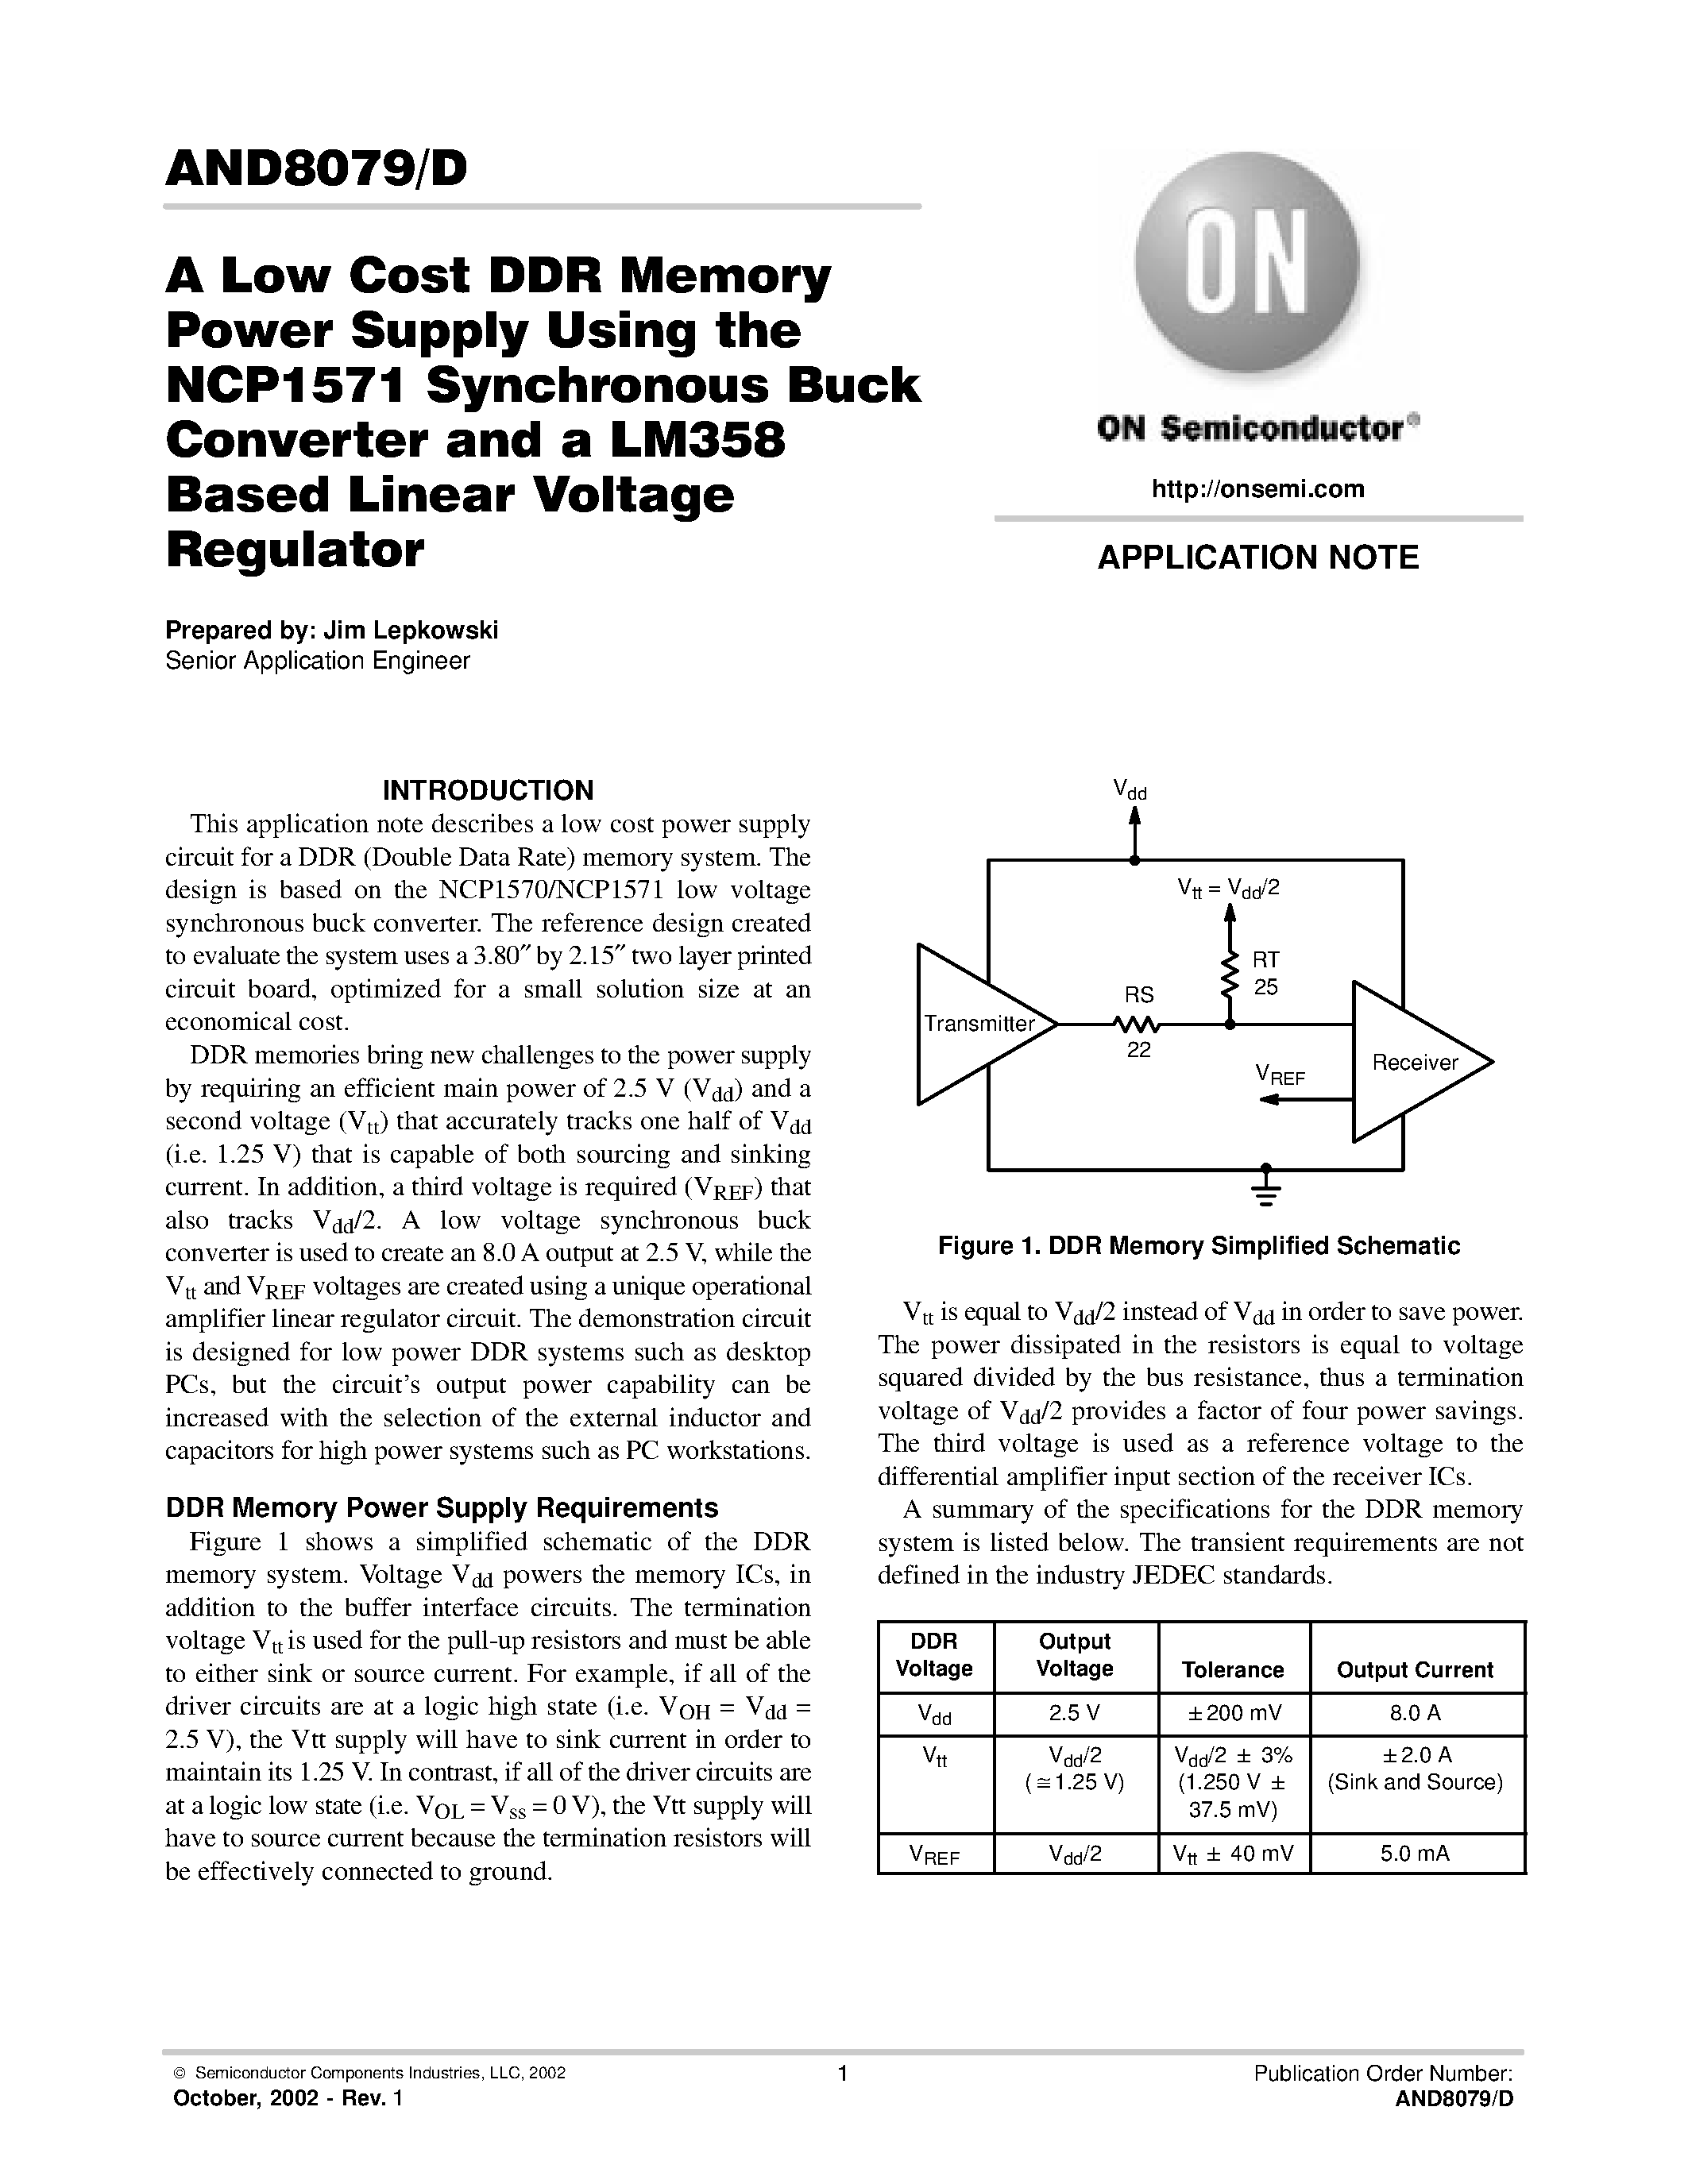 Datasheet AND8079 - A Low Cost DDR Memory Power Supply Using the NCP1571 Synchronous Buck Converter and a LM358 Based Linear Voltage Regulator page 1